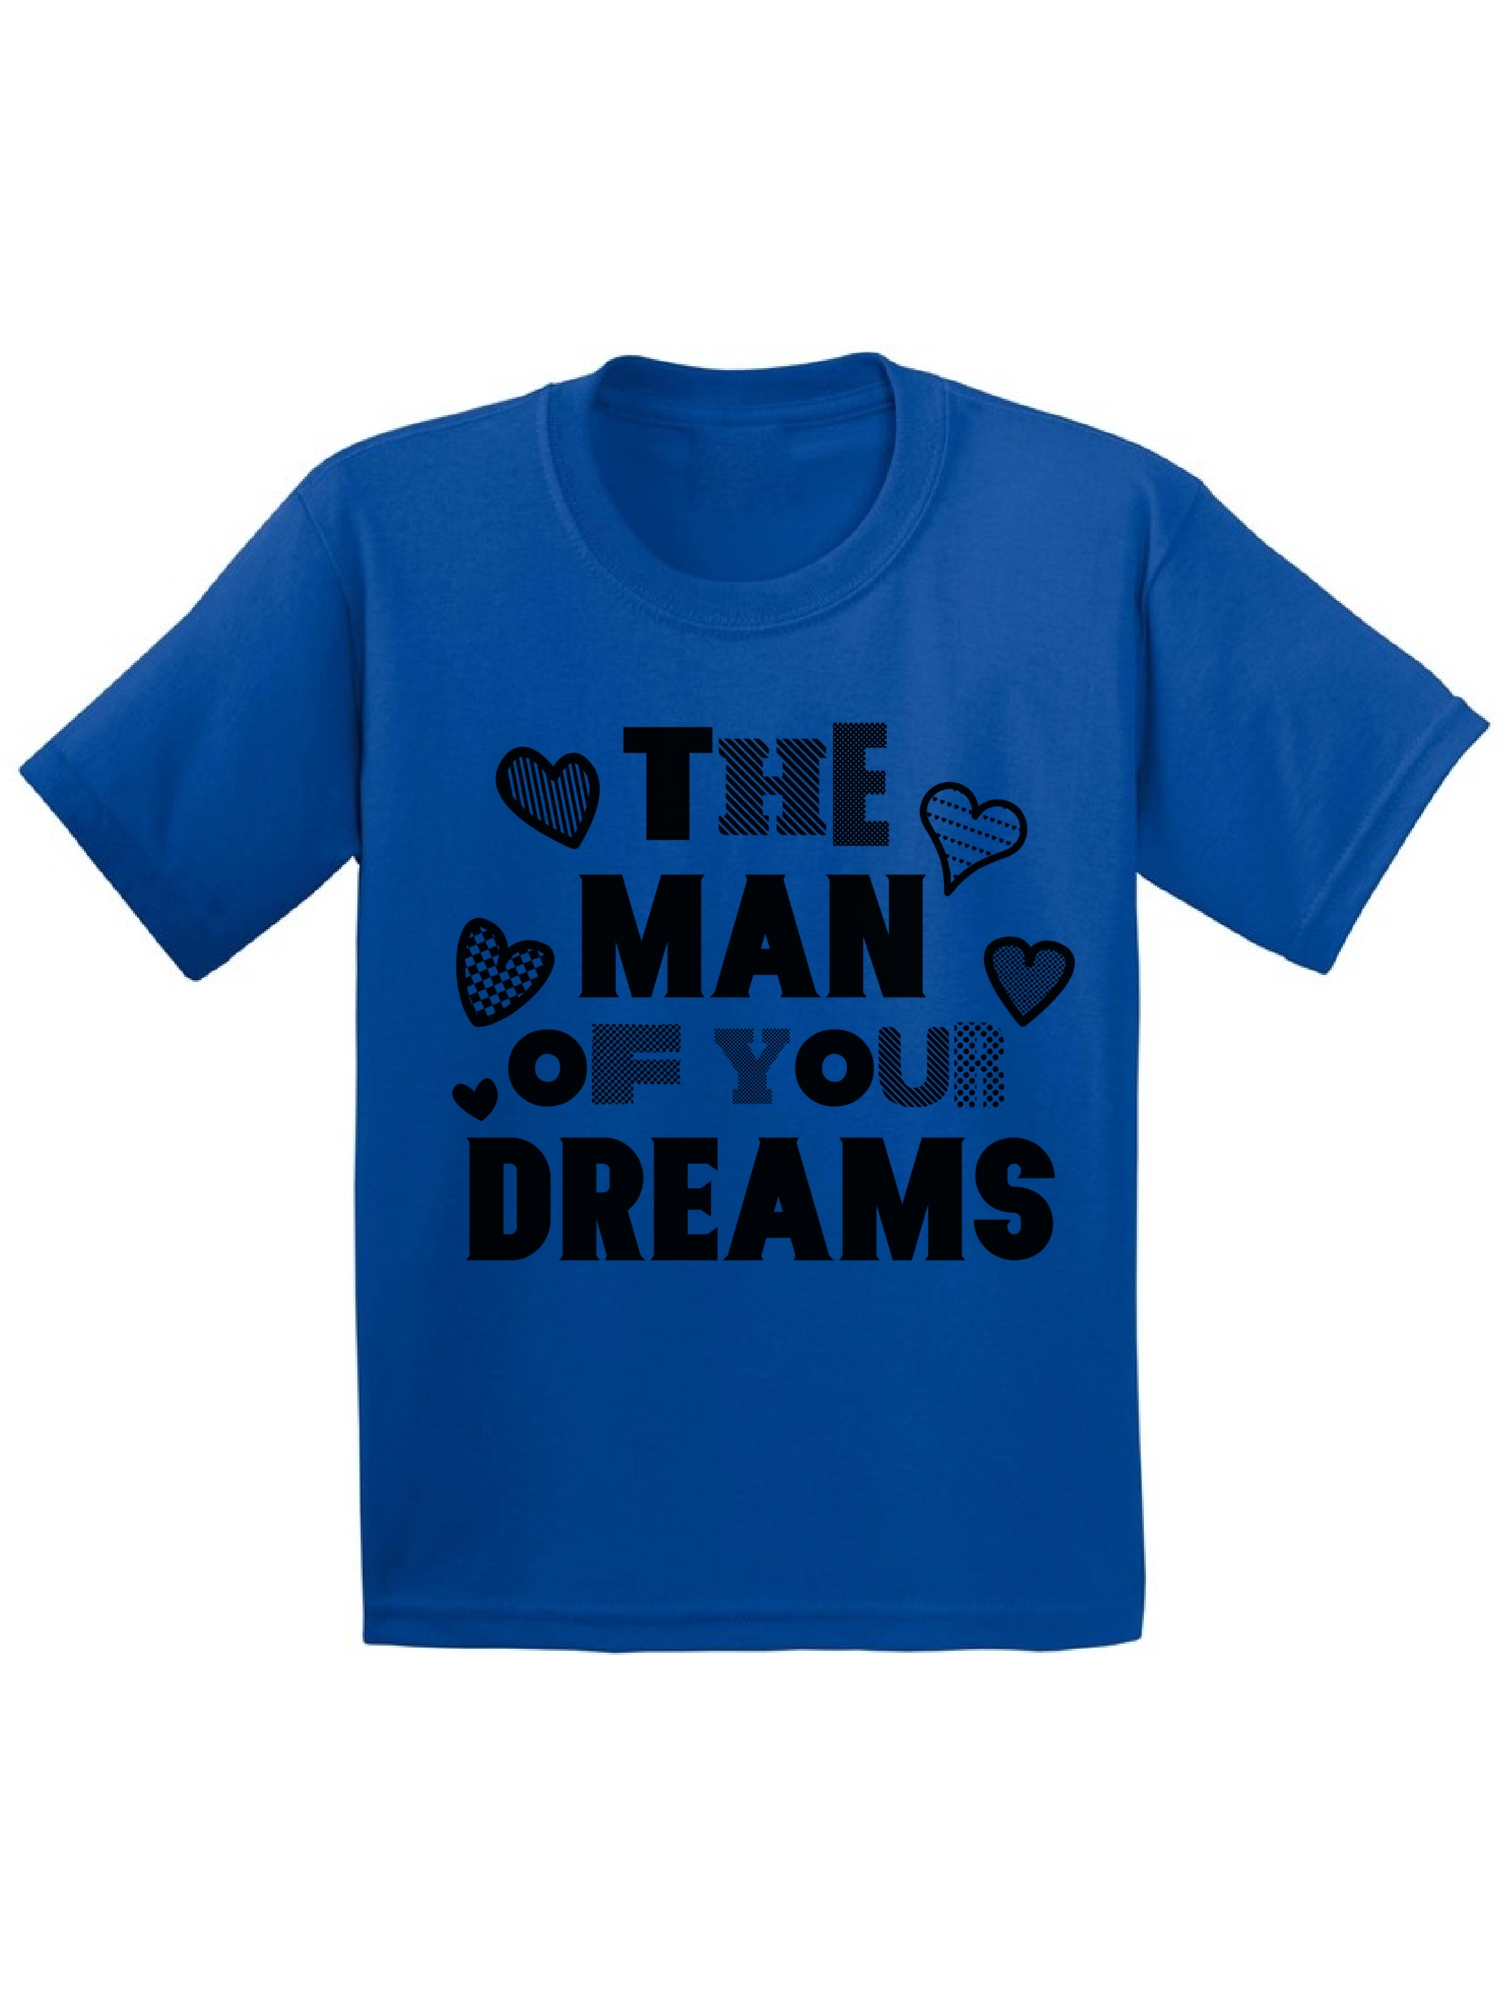 Awkward Styles The Man Of Your Dreams Tshirt for Youth Boys Cute Gifts for Boys Mom Boys Valentine Shirt Funny Valentines Tshirt for Youth Boys Valentine Gifts for Kids Valentines Ladies Men Shirt - image 1 of 4